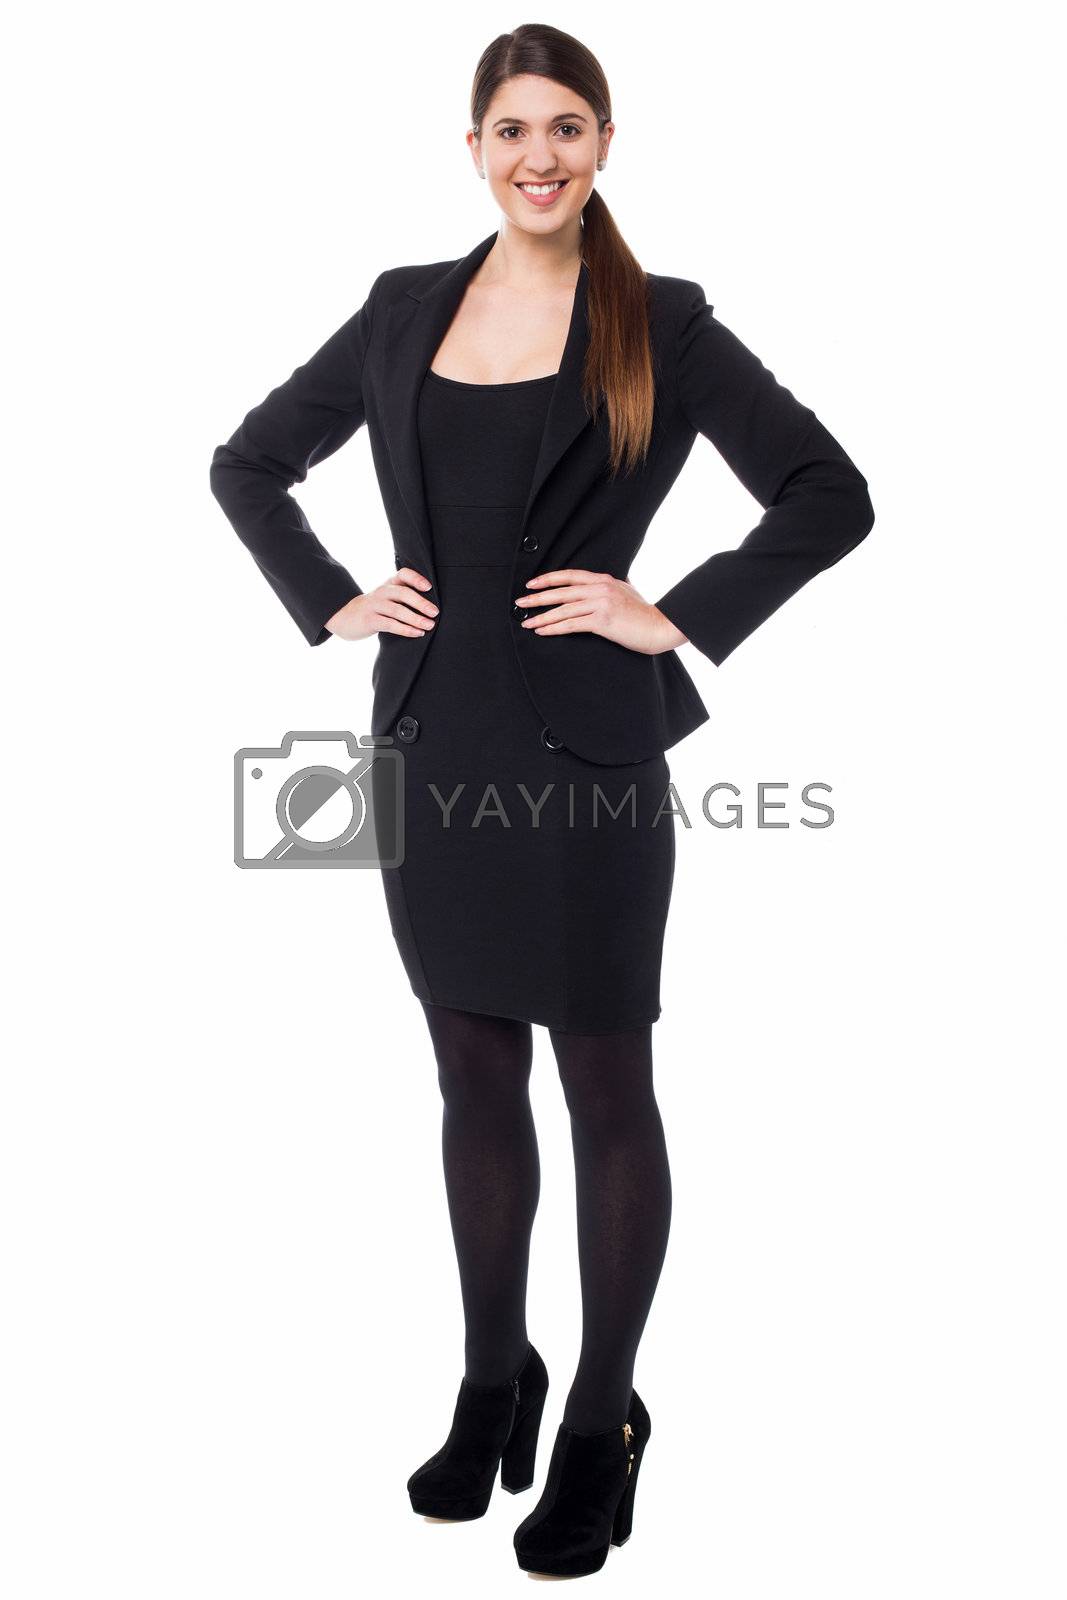 Royalty free image of Ambitious young business employee by stockyimages